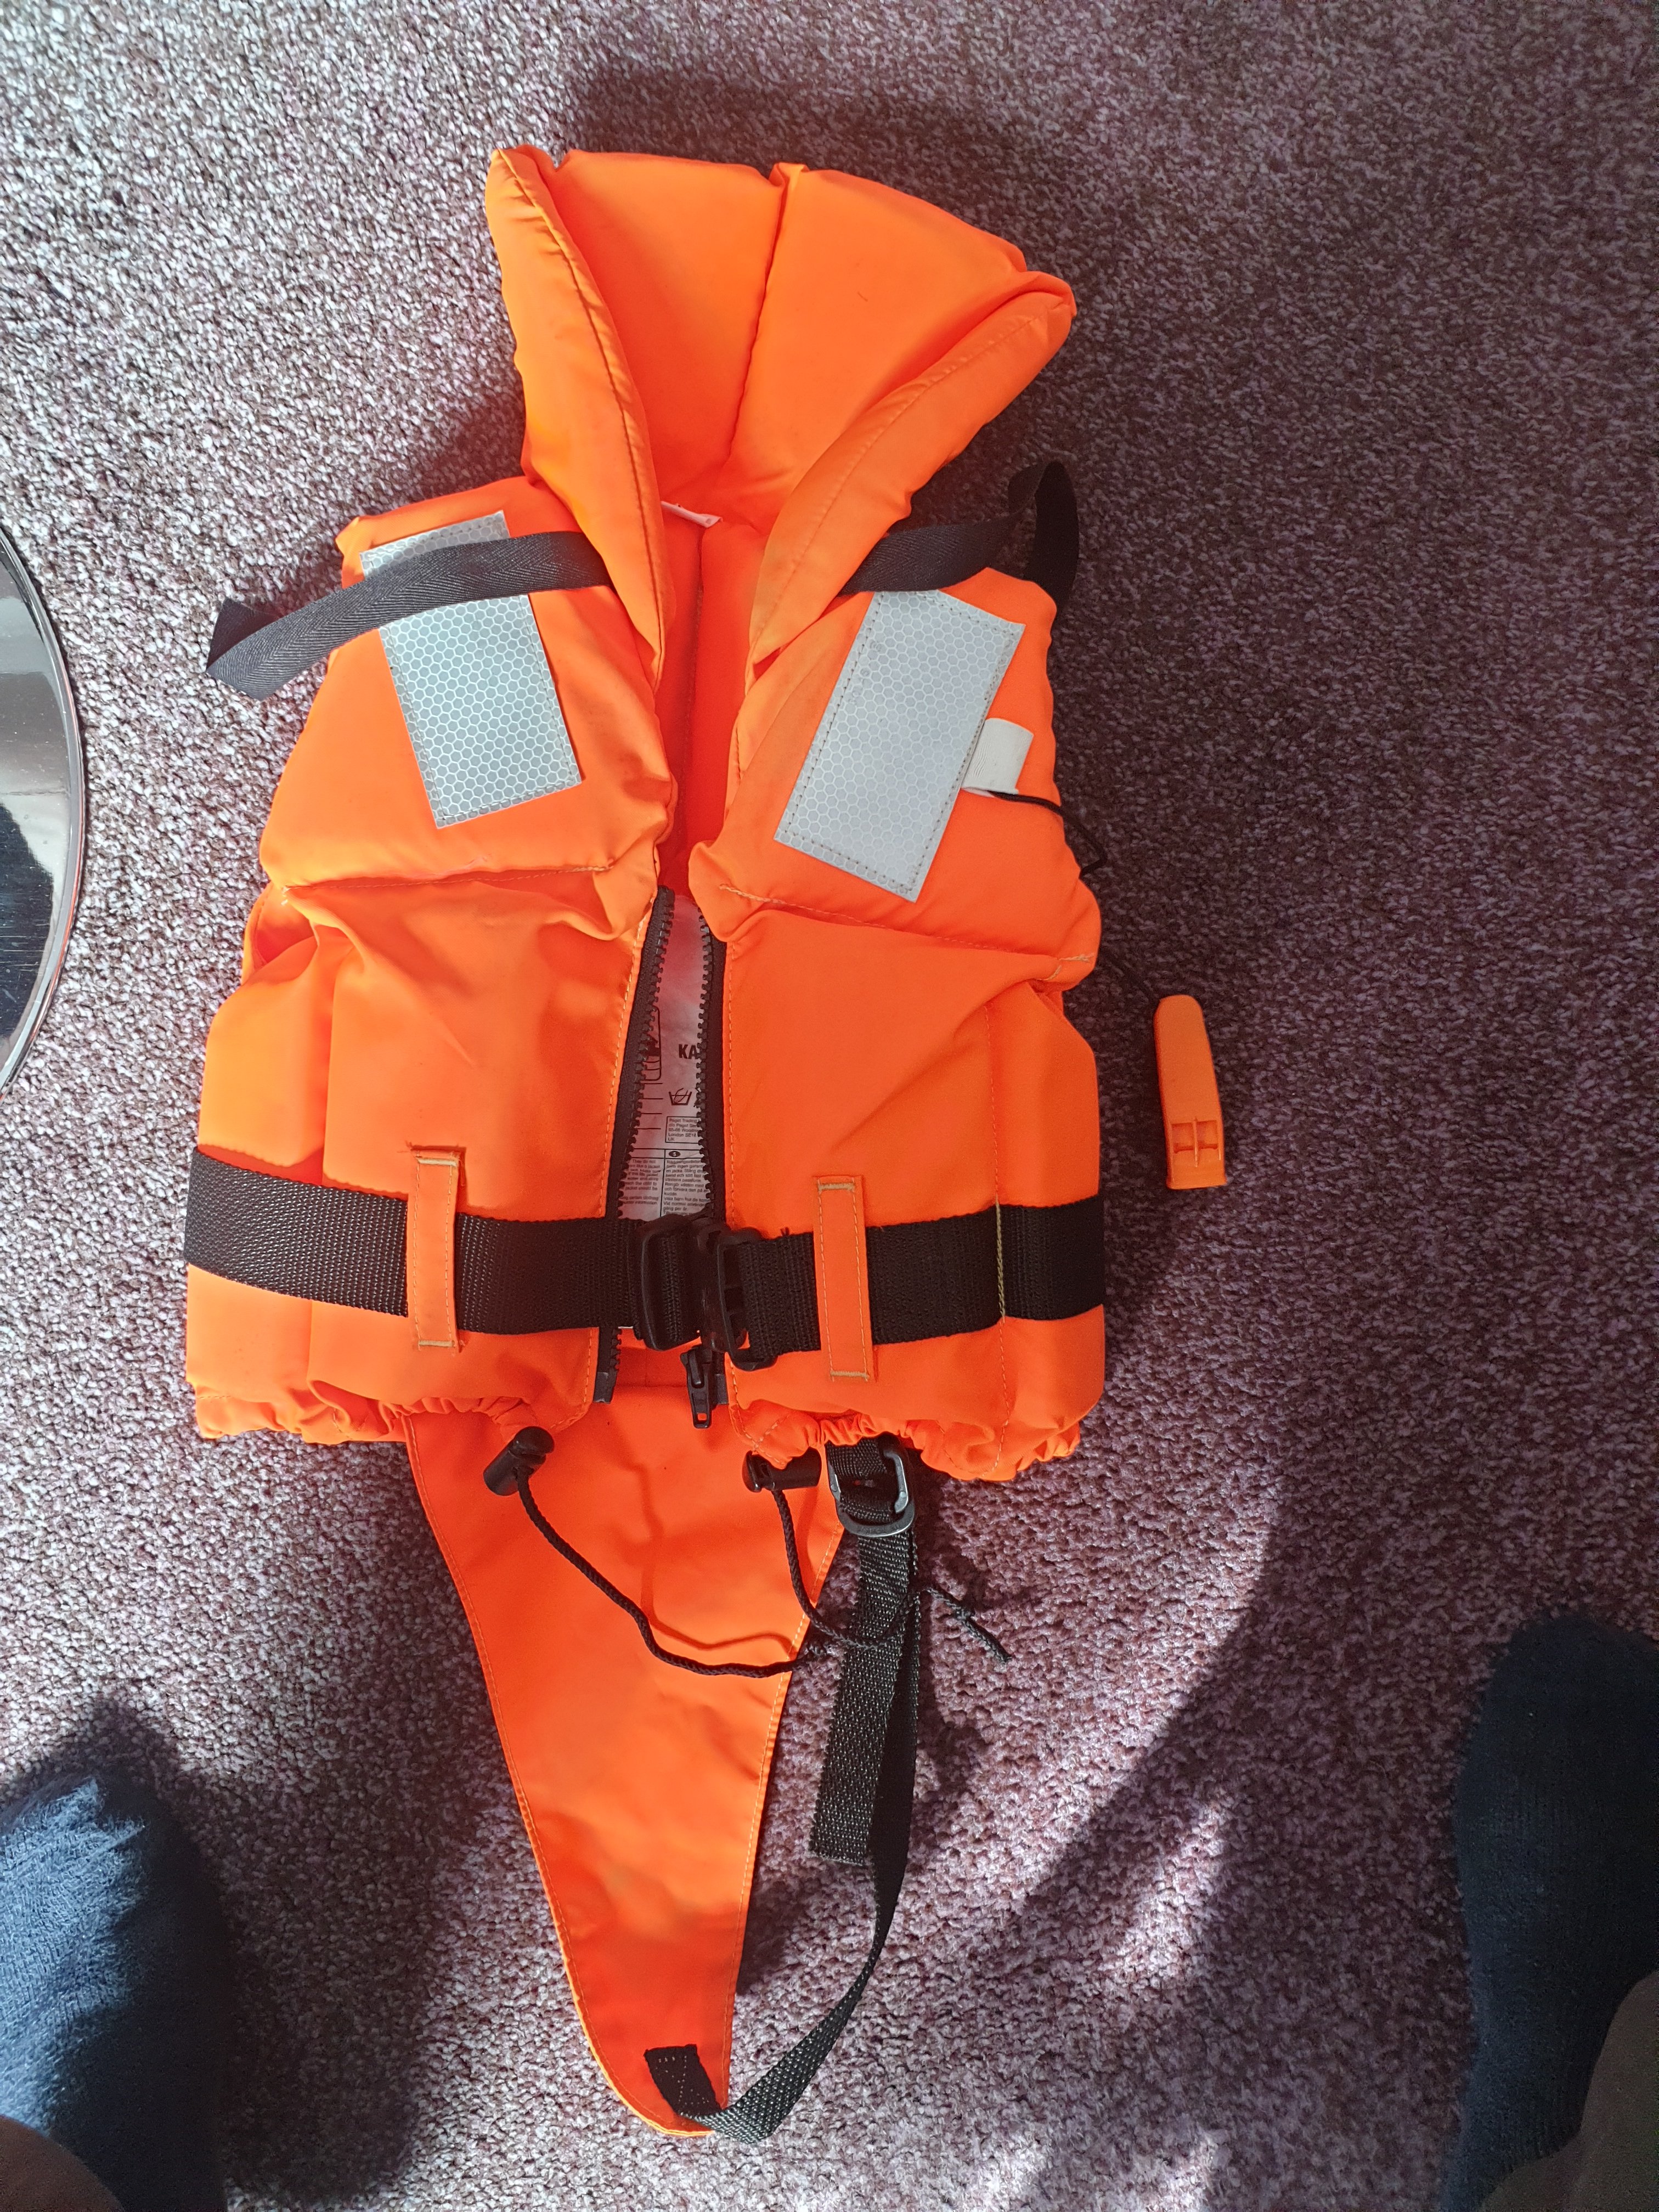 Free - Childs Life Jacket - Swap and Shop - Poole Bay Small Boat ...